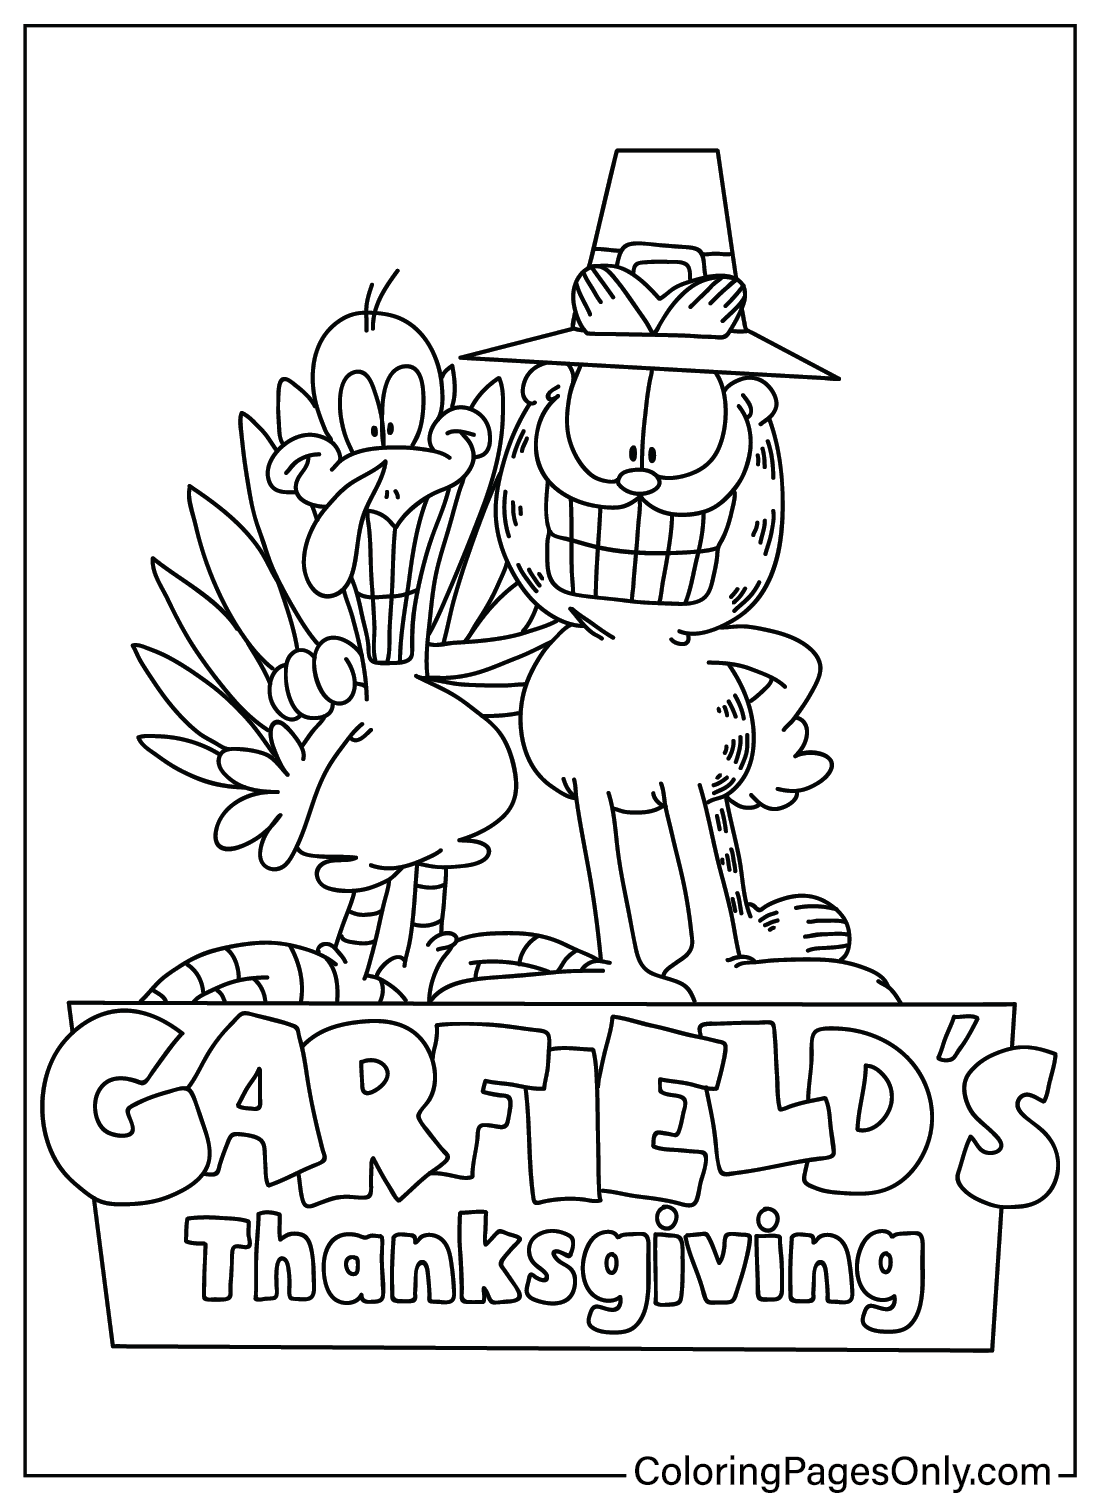 Thanksgiving Garfield Coloring Page from Thanksgiving Cartoon